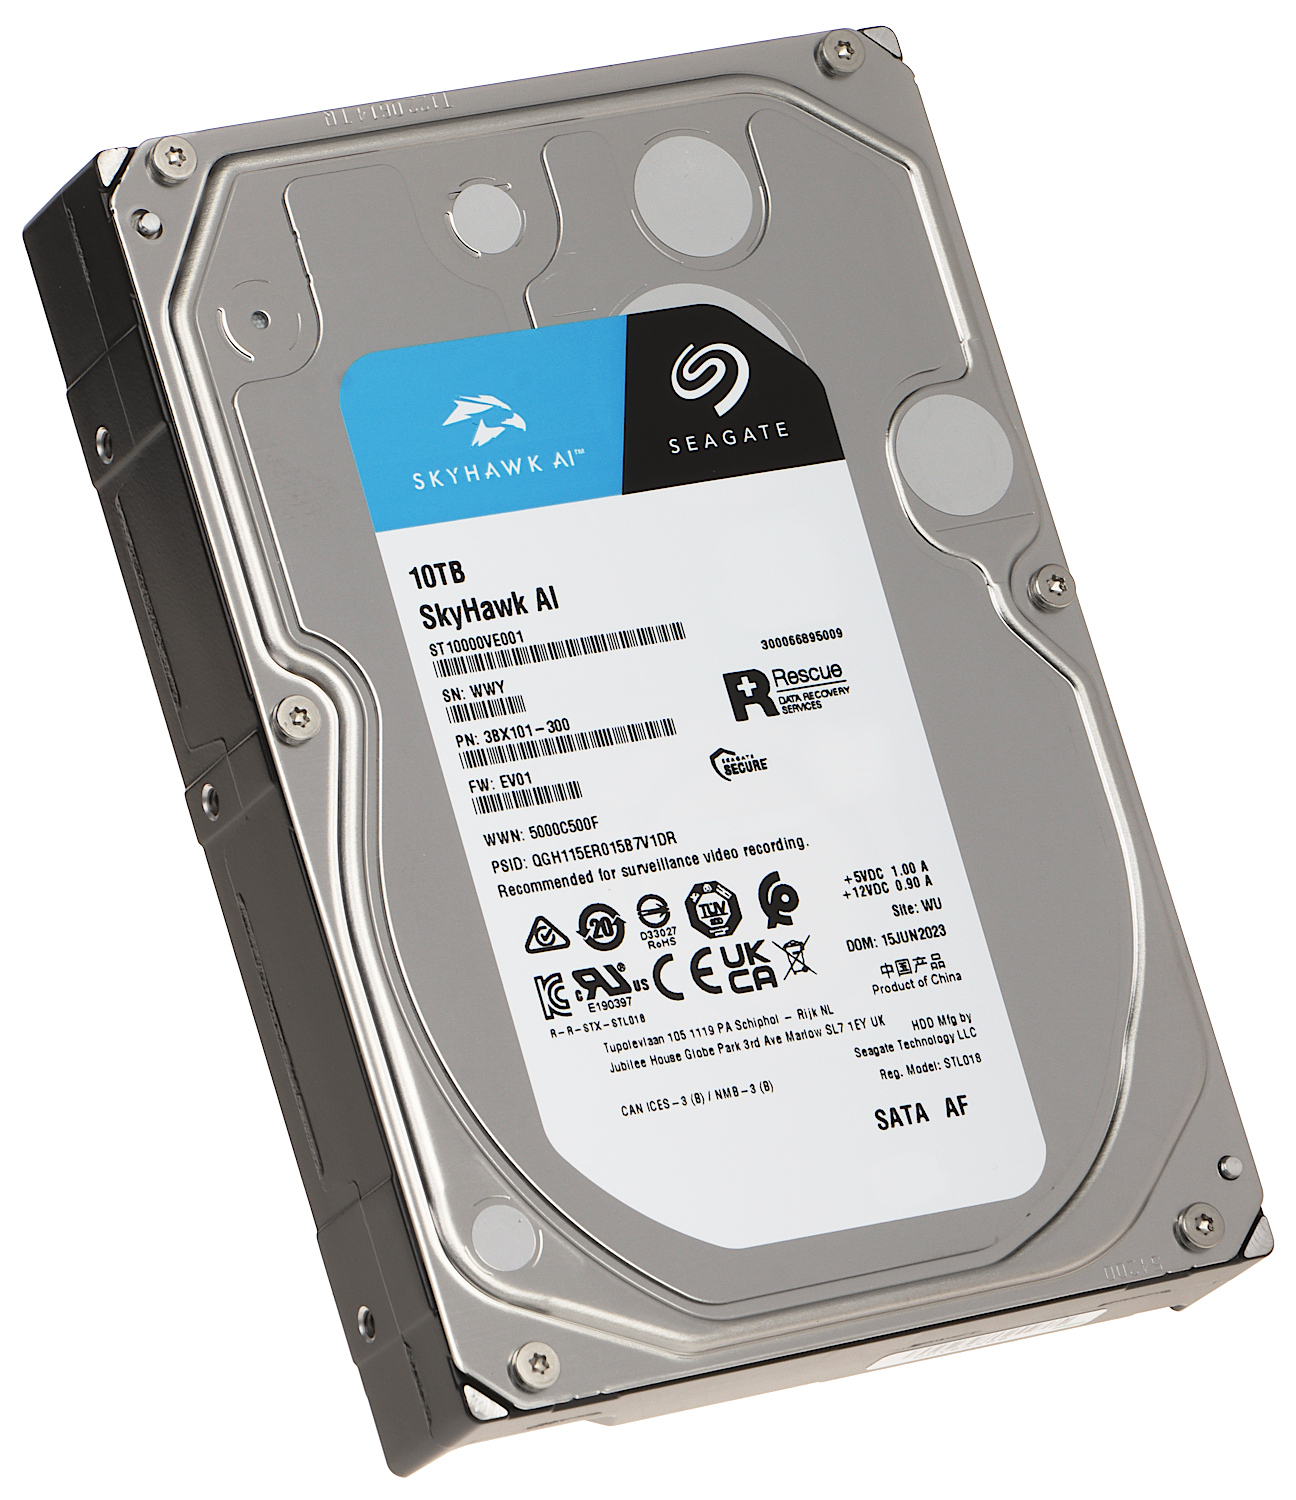 HDD FOR DVR HDD-ST10000VE001 10TB 24/7 SkyHawk AI SEAG... - HDDs - Delta